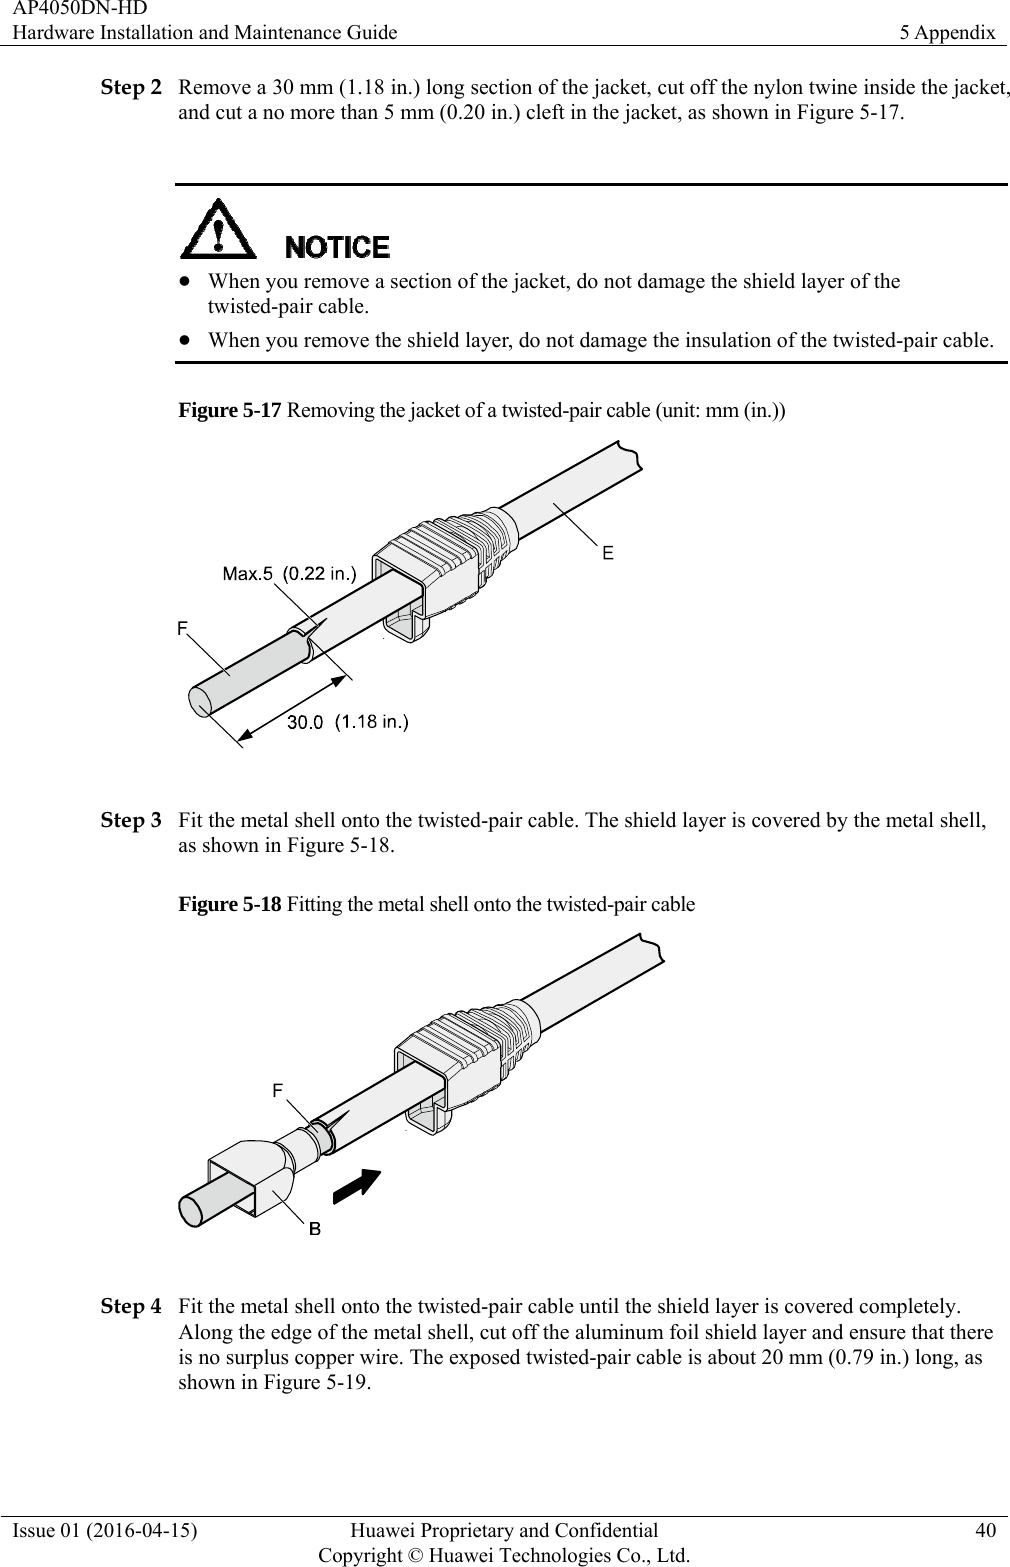 AP4050DN-HD Hardware Installation and Maintenance Guide  5 Appendix Issue 01 (2016-04-15)  Huawei Proprietary and Confidential         Copyright © Huawei Technologies Co., Ltd.40 Step 2 Remove a 30 mm (1.18 in.) long section of the jacket, cut off the nylon twine inside the jacket, and cut a no more than 5 mm (0.20 in.) cleft in the jacket, as shown in Figure 5-17.    When you remove a section of the jacket, do not damage the shield layer of the twisted-pair cable.  When you remove the shield layer, do not damage the insulation of the twisted-pair cable. Figure 5-17 Removing the jacket of a twisted-pair cable (unit: mm (in.))   Step 3 Fit the metal shell onto the twisted-pair cable. The shield layer is covered by the metal shell, as shown in Figure 5-18. Figure 5-18 Fitting the metal shell onto the twisted-pair cable   Step 4 Fit the metal shell onto the twisted-pair cable until the shield layer is covered completely. Along the edge of the metal shell, cut off the aluminum foil shield layer and ensure that there is no surplus copper wire. The exposed twisted-pair cable is about 20 mm (0.79 in.) long, as shown in Figure 5-19. 